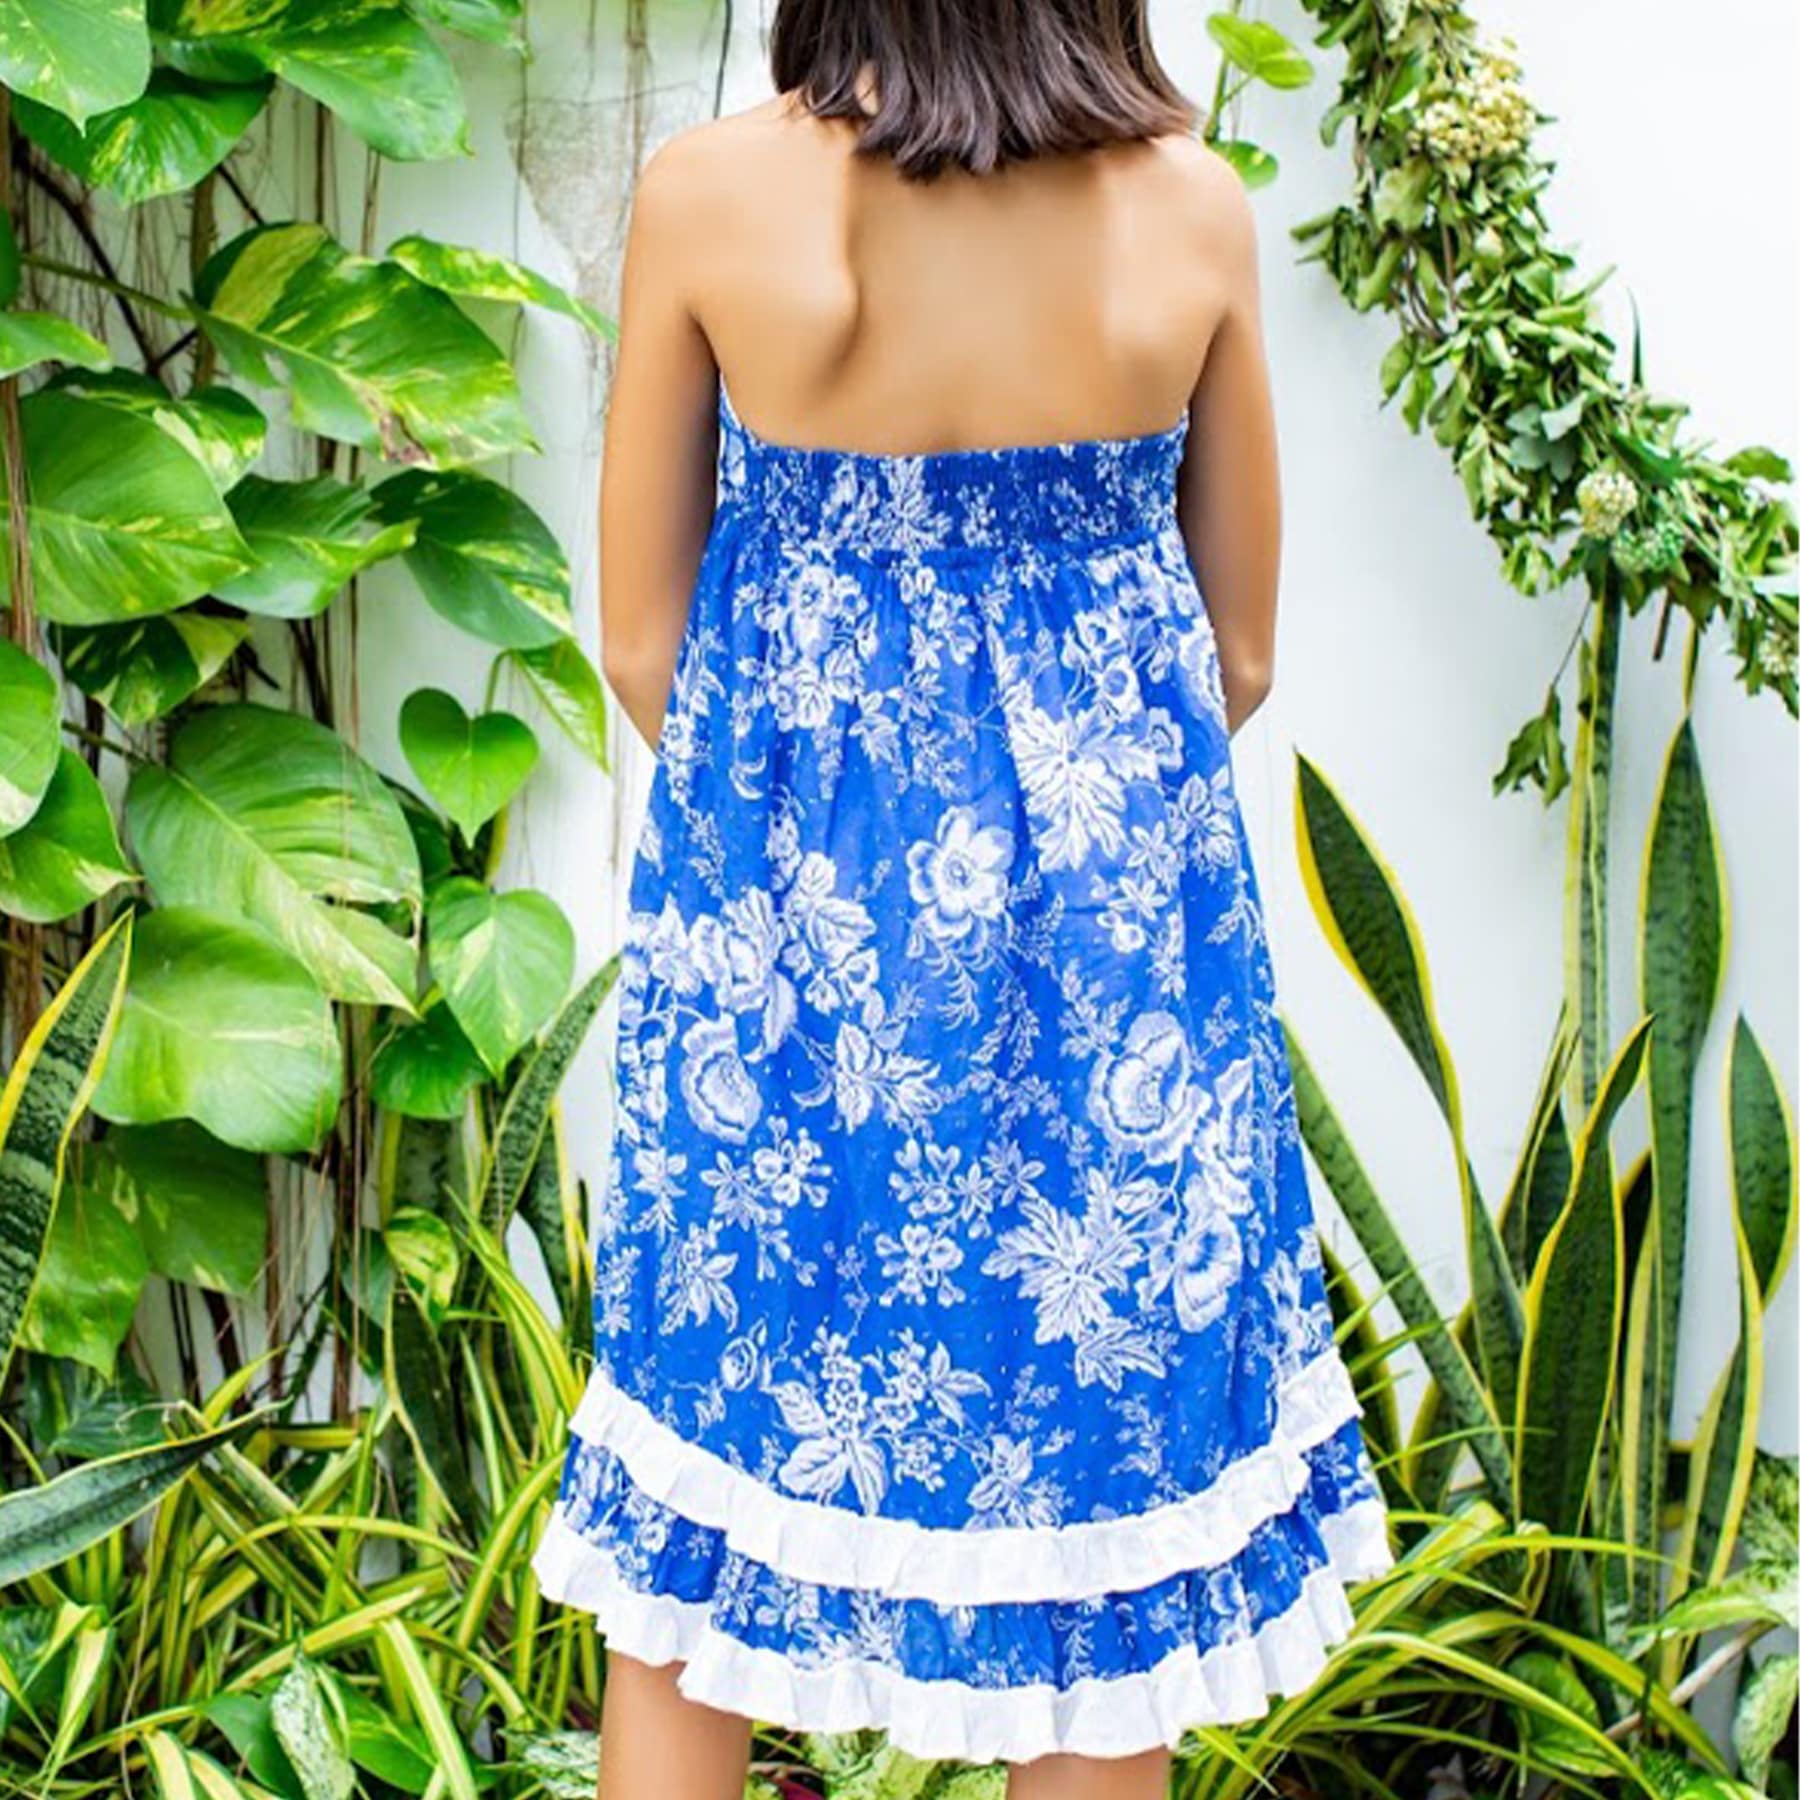 Royal blue and white floral print summer dress, V-neck with straps around the neck trimmed with white lace, midi length with double row of white ruffles. Midi length dress with royal blue flowers for girls. and teenagers of the children's fashion brand LA FAUTE A VOLTAIRE